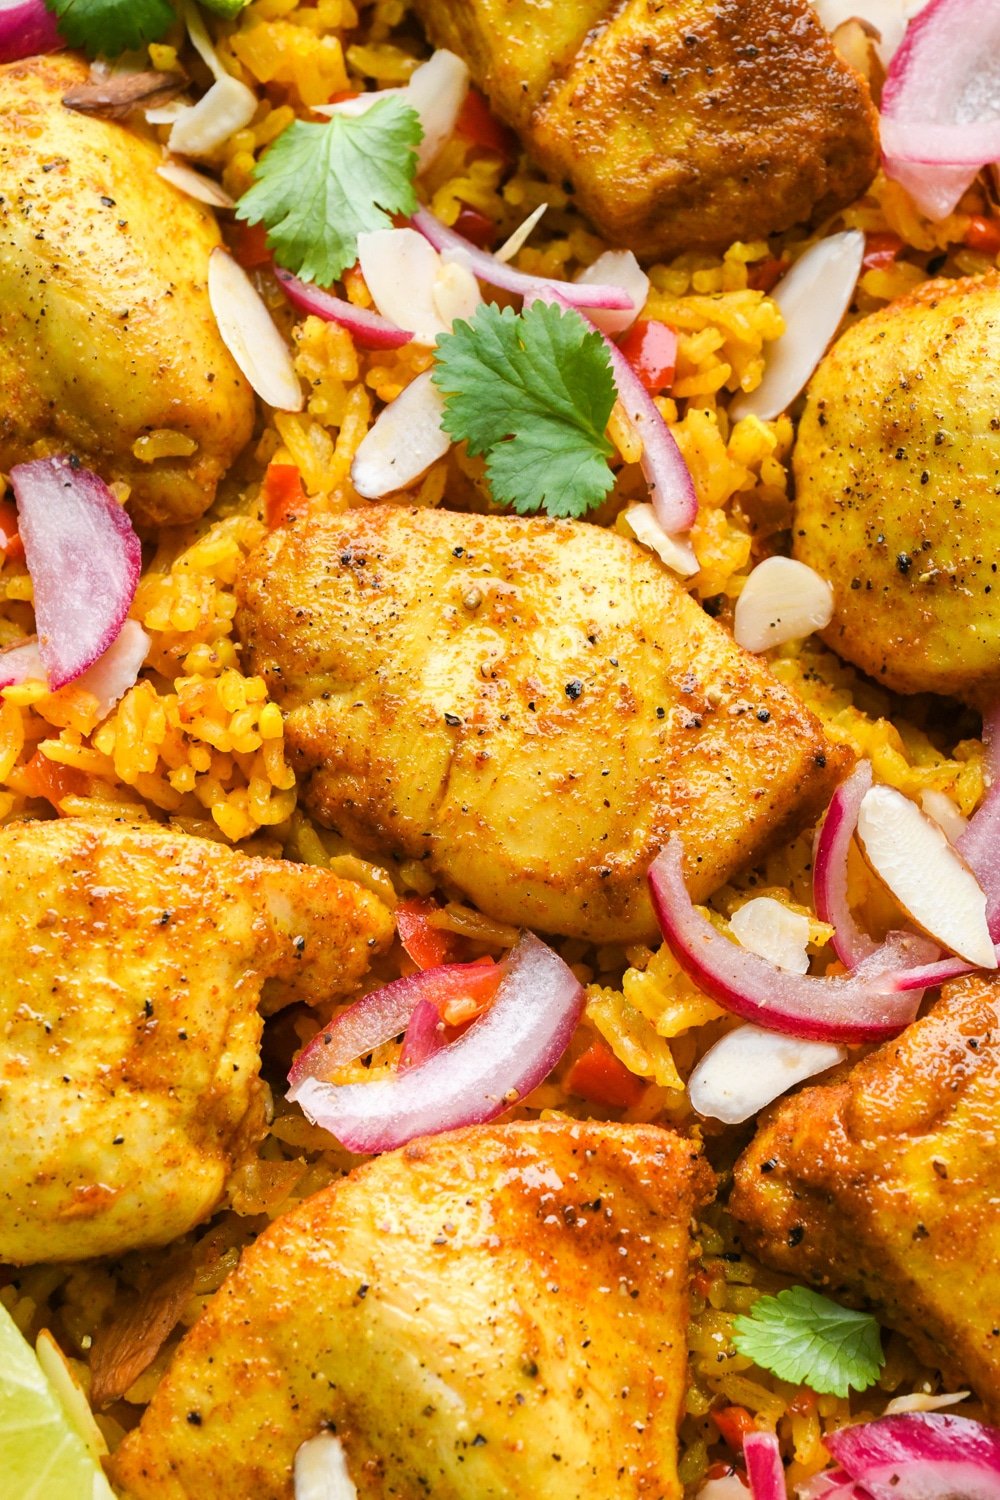 A close up image of cooked pieces of spiced chicken nestled into the fluffy rice and topped with colorful garnishes.